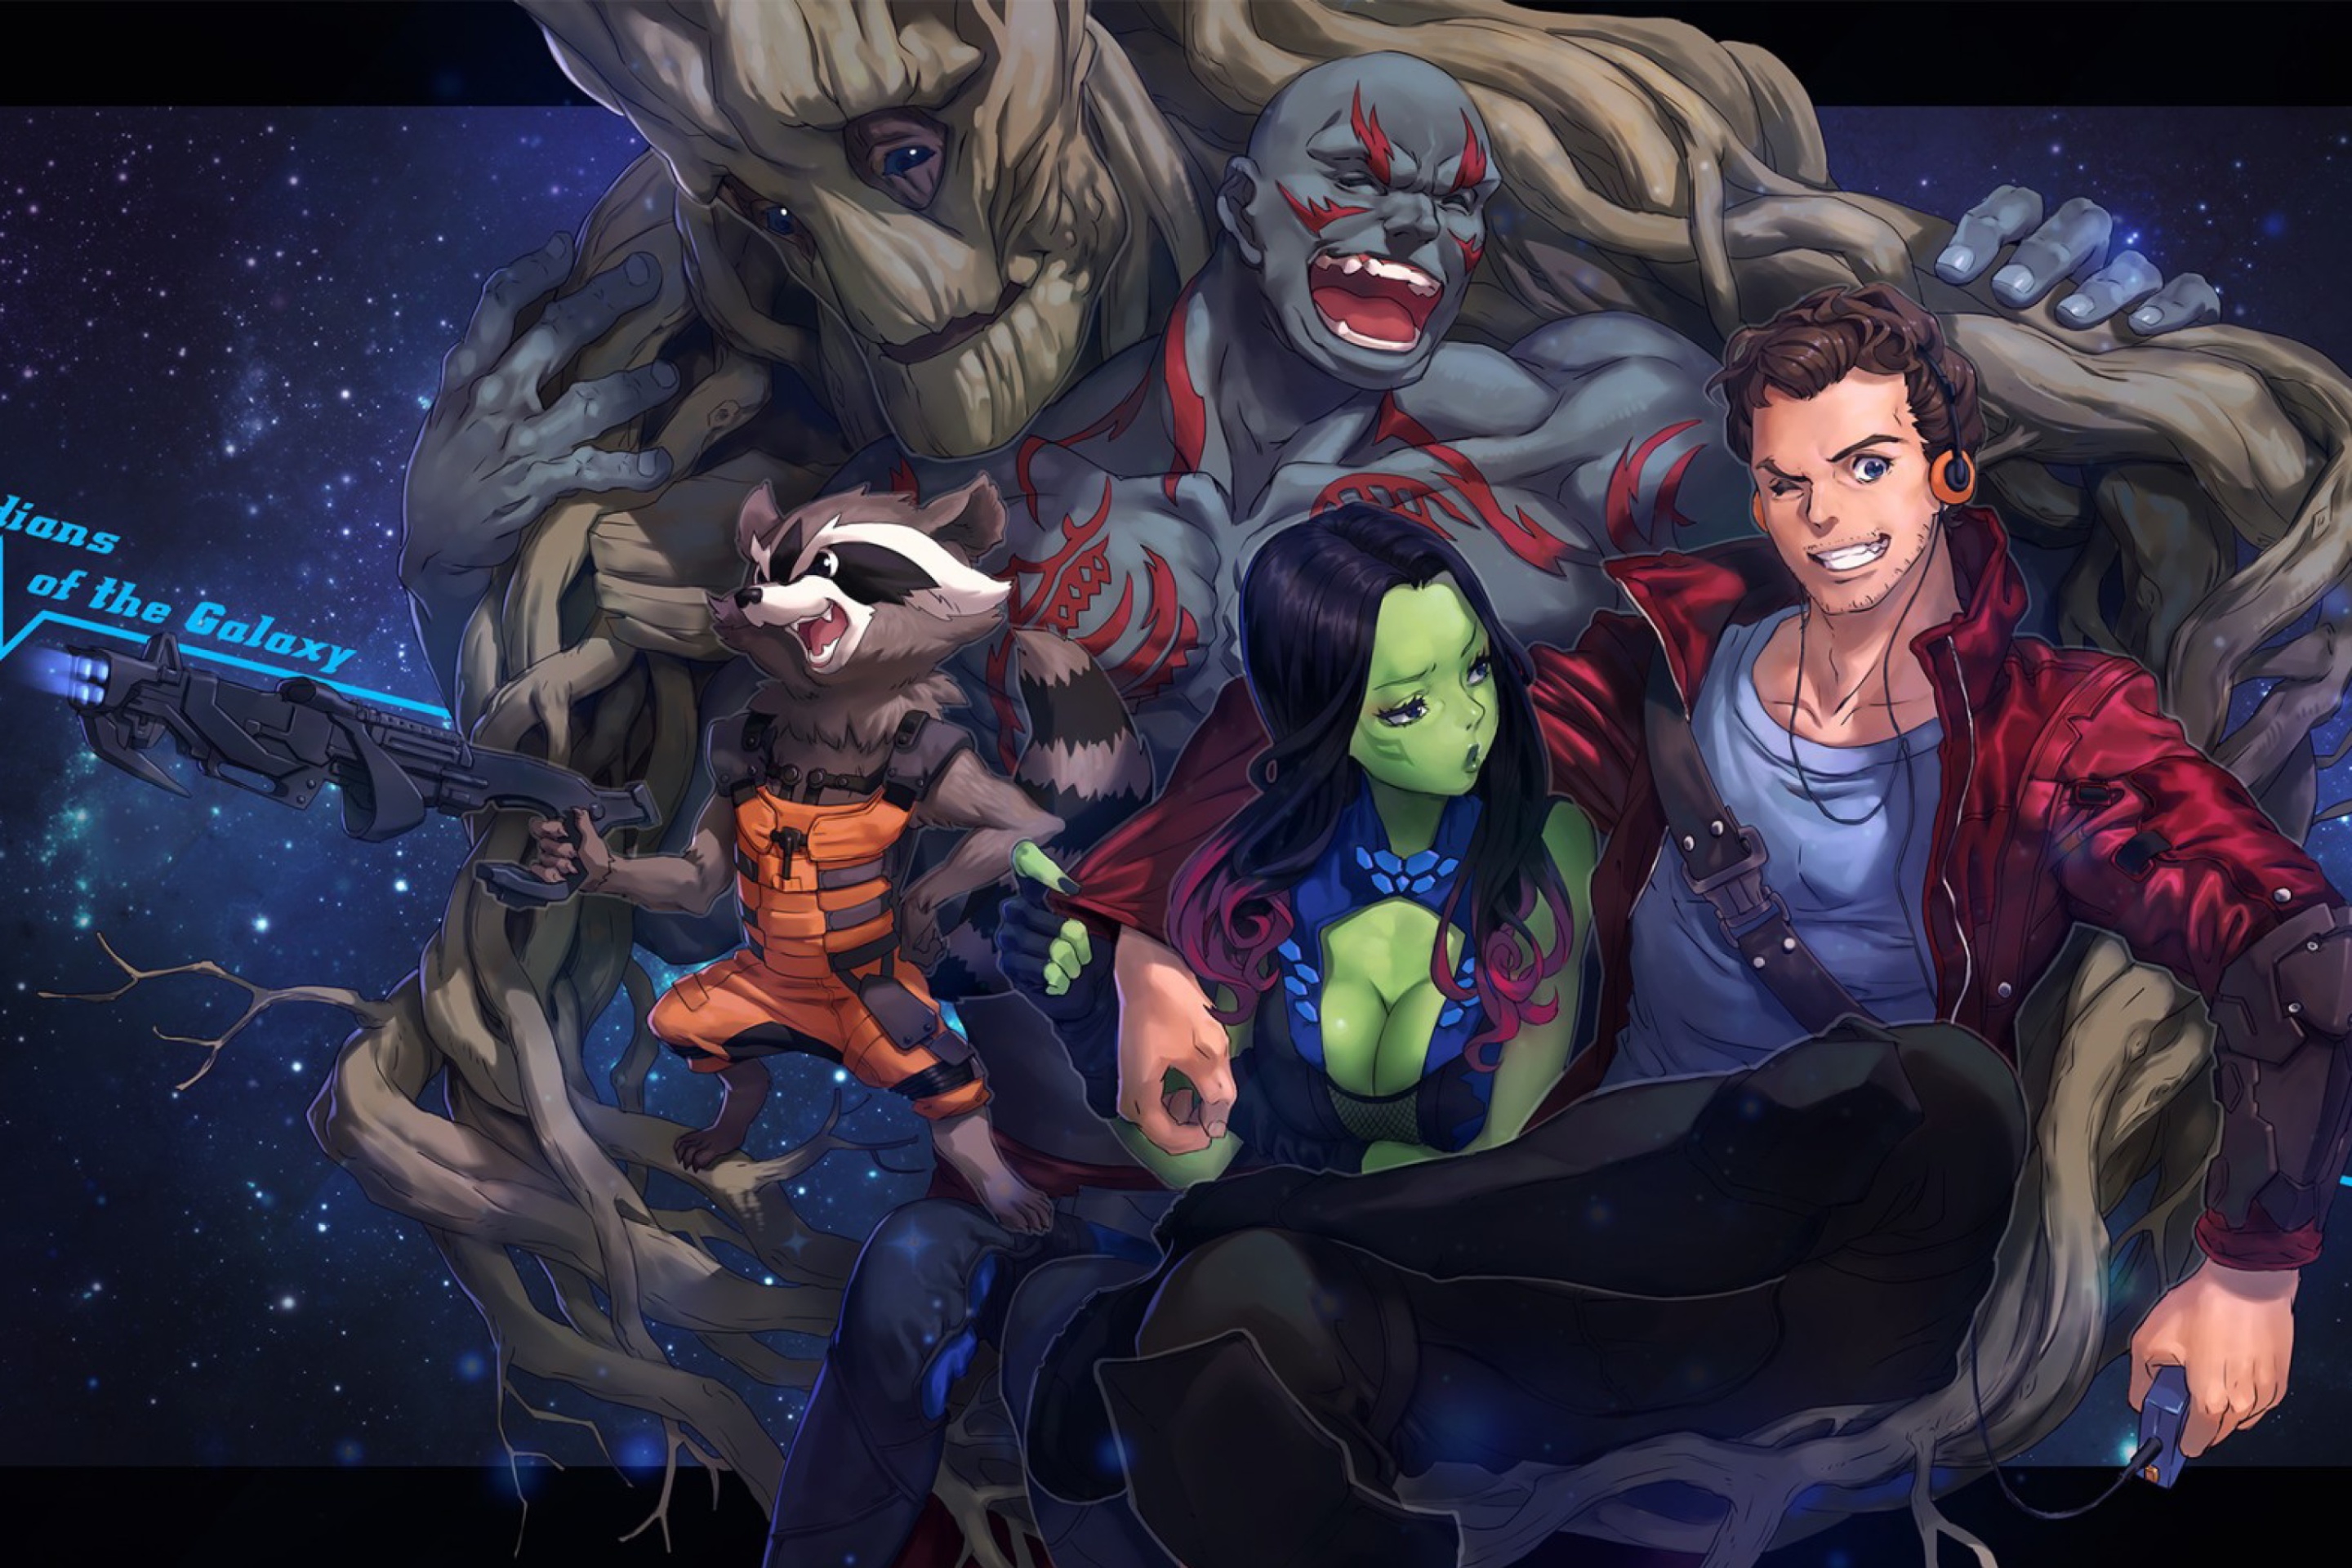 Das Strange Tales with Gamora and Drax the Destroyer Wallpaper 2880x1920